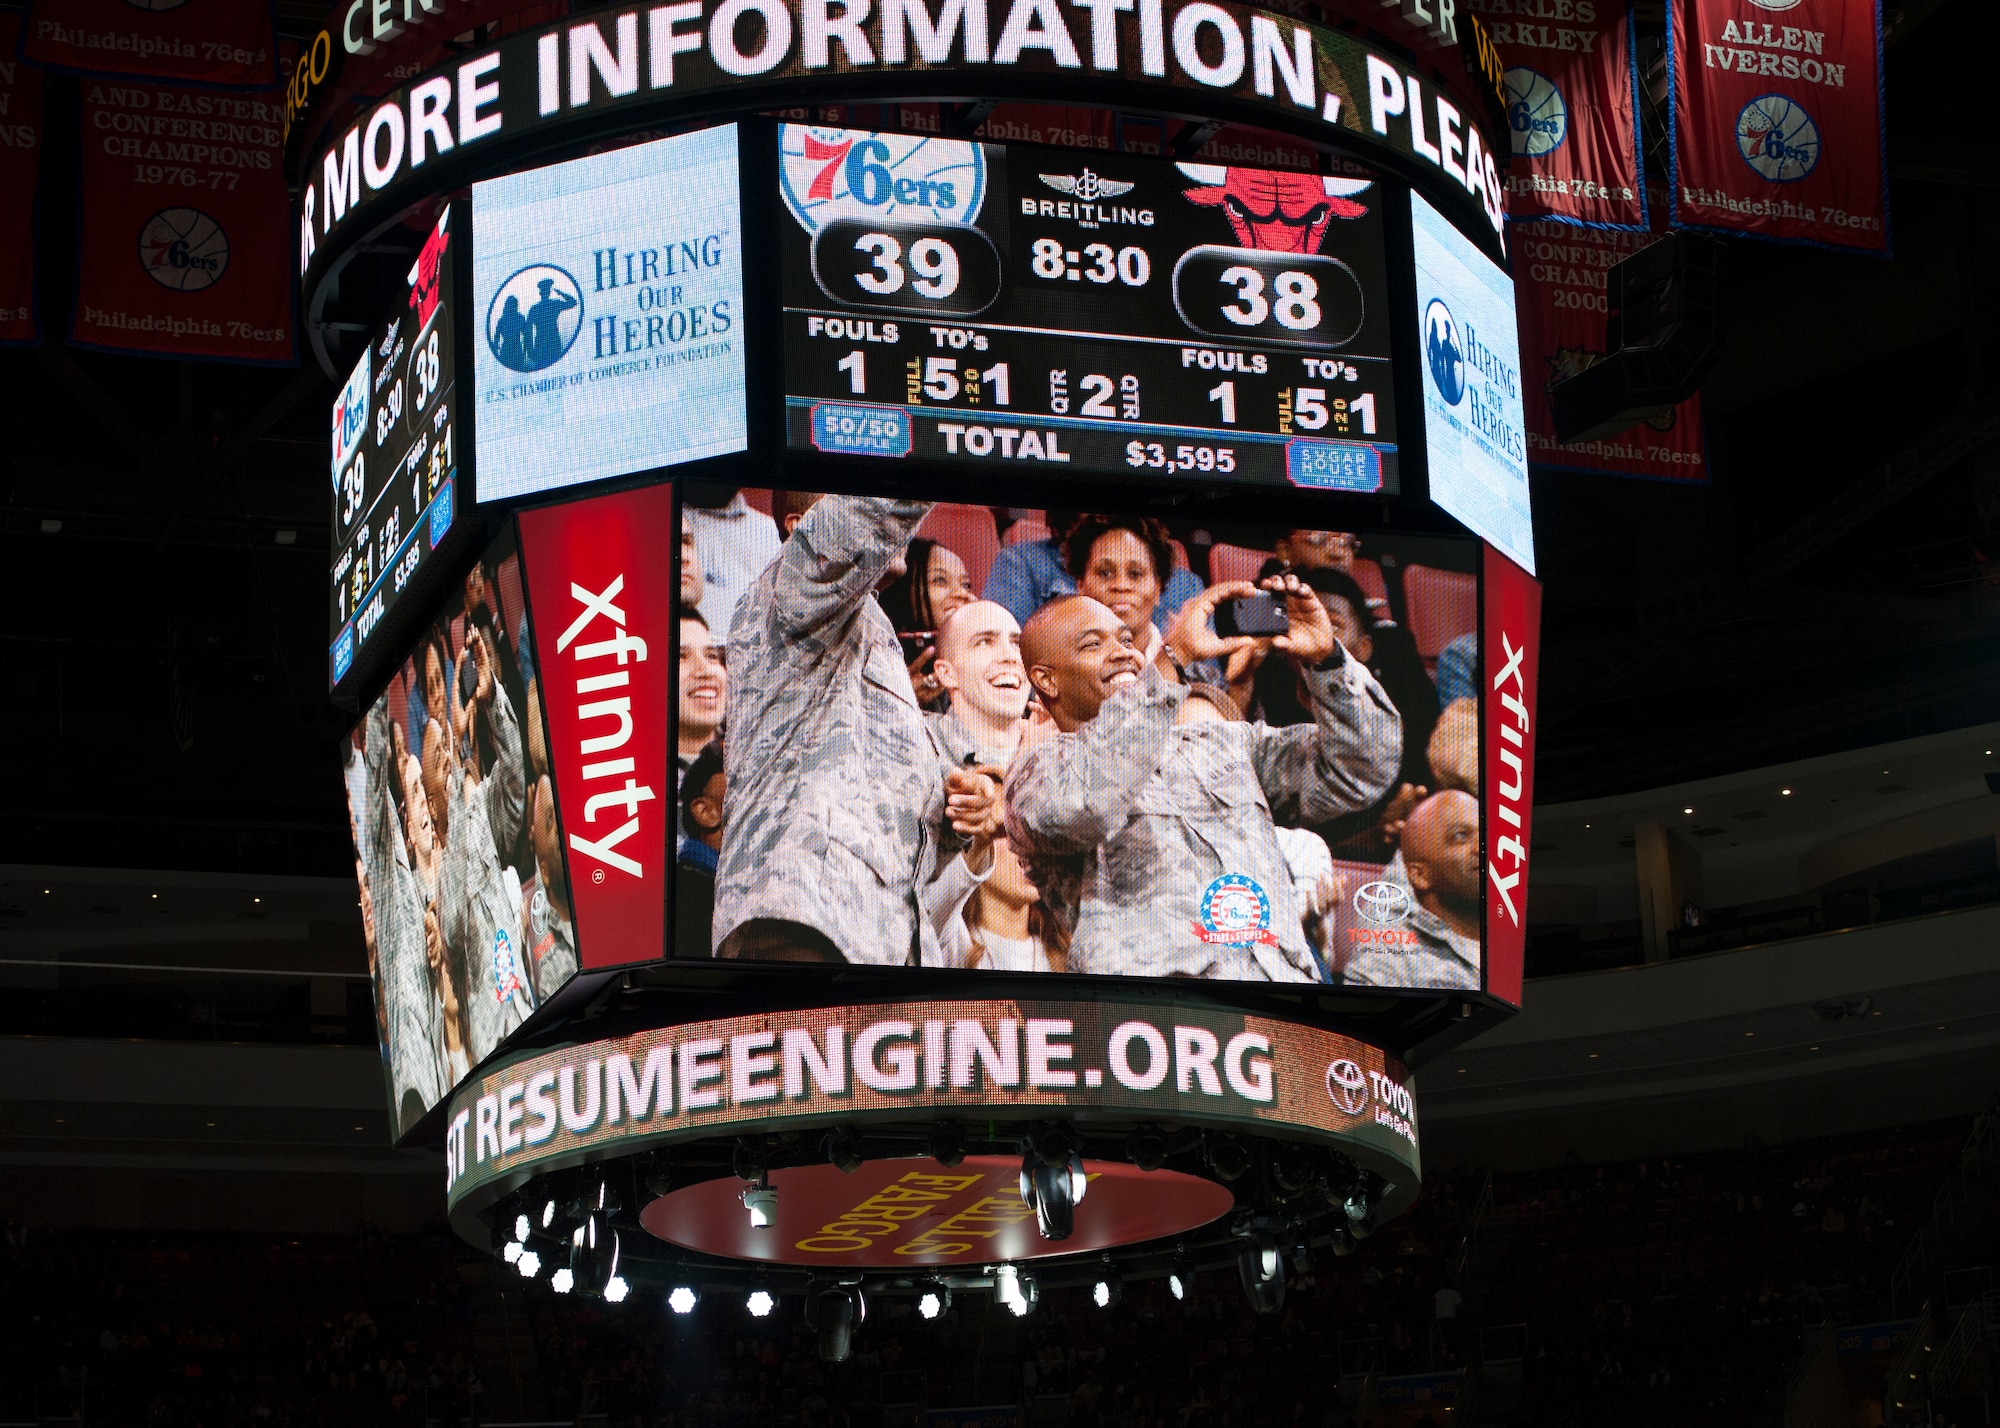 Several Team Dover Airmen react to being shown on the arena Jumbotron during a Chicago Bulls versus Philadelphia 76ers basketball game Nov. 7, 2014, at the Wells Fargo Center, in Philadelphia. Many service members were featured on the Jumbotron throughout the game. (U.S. Air Force photo/Airman 1st Class Zachary Cacicia)